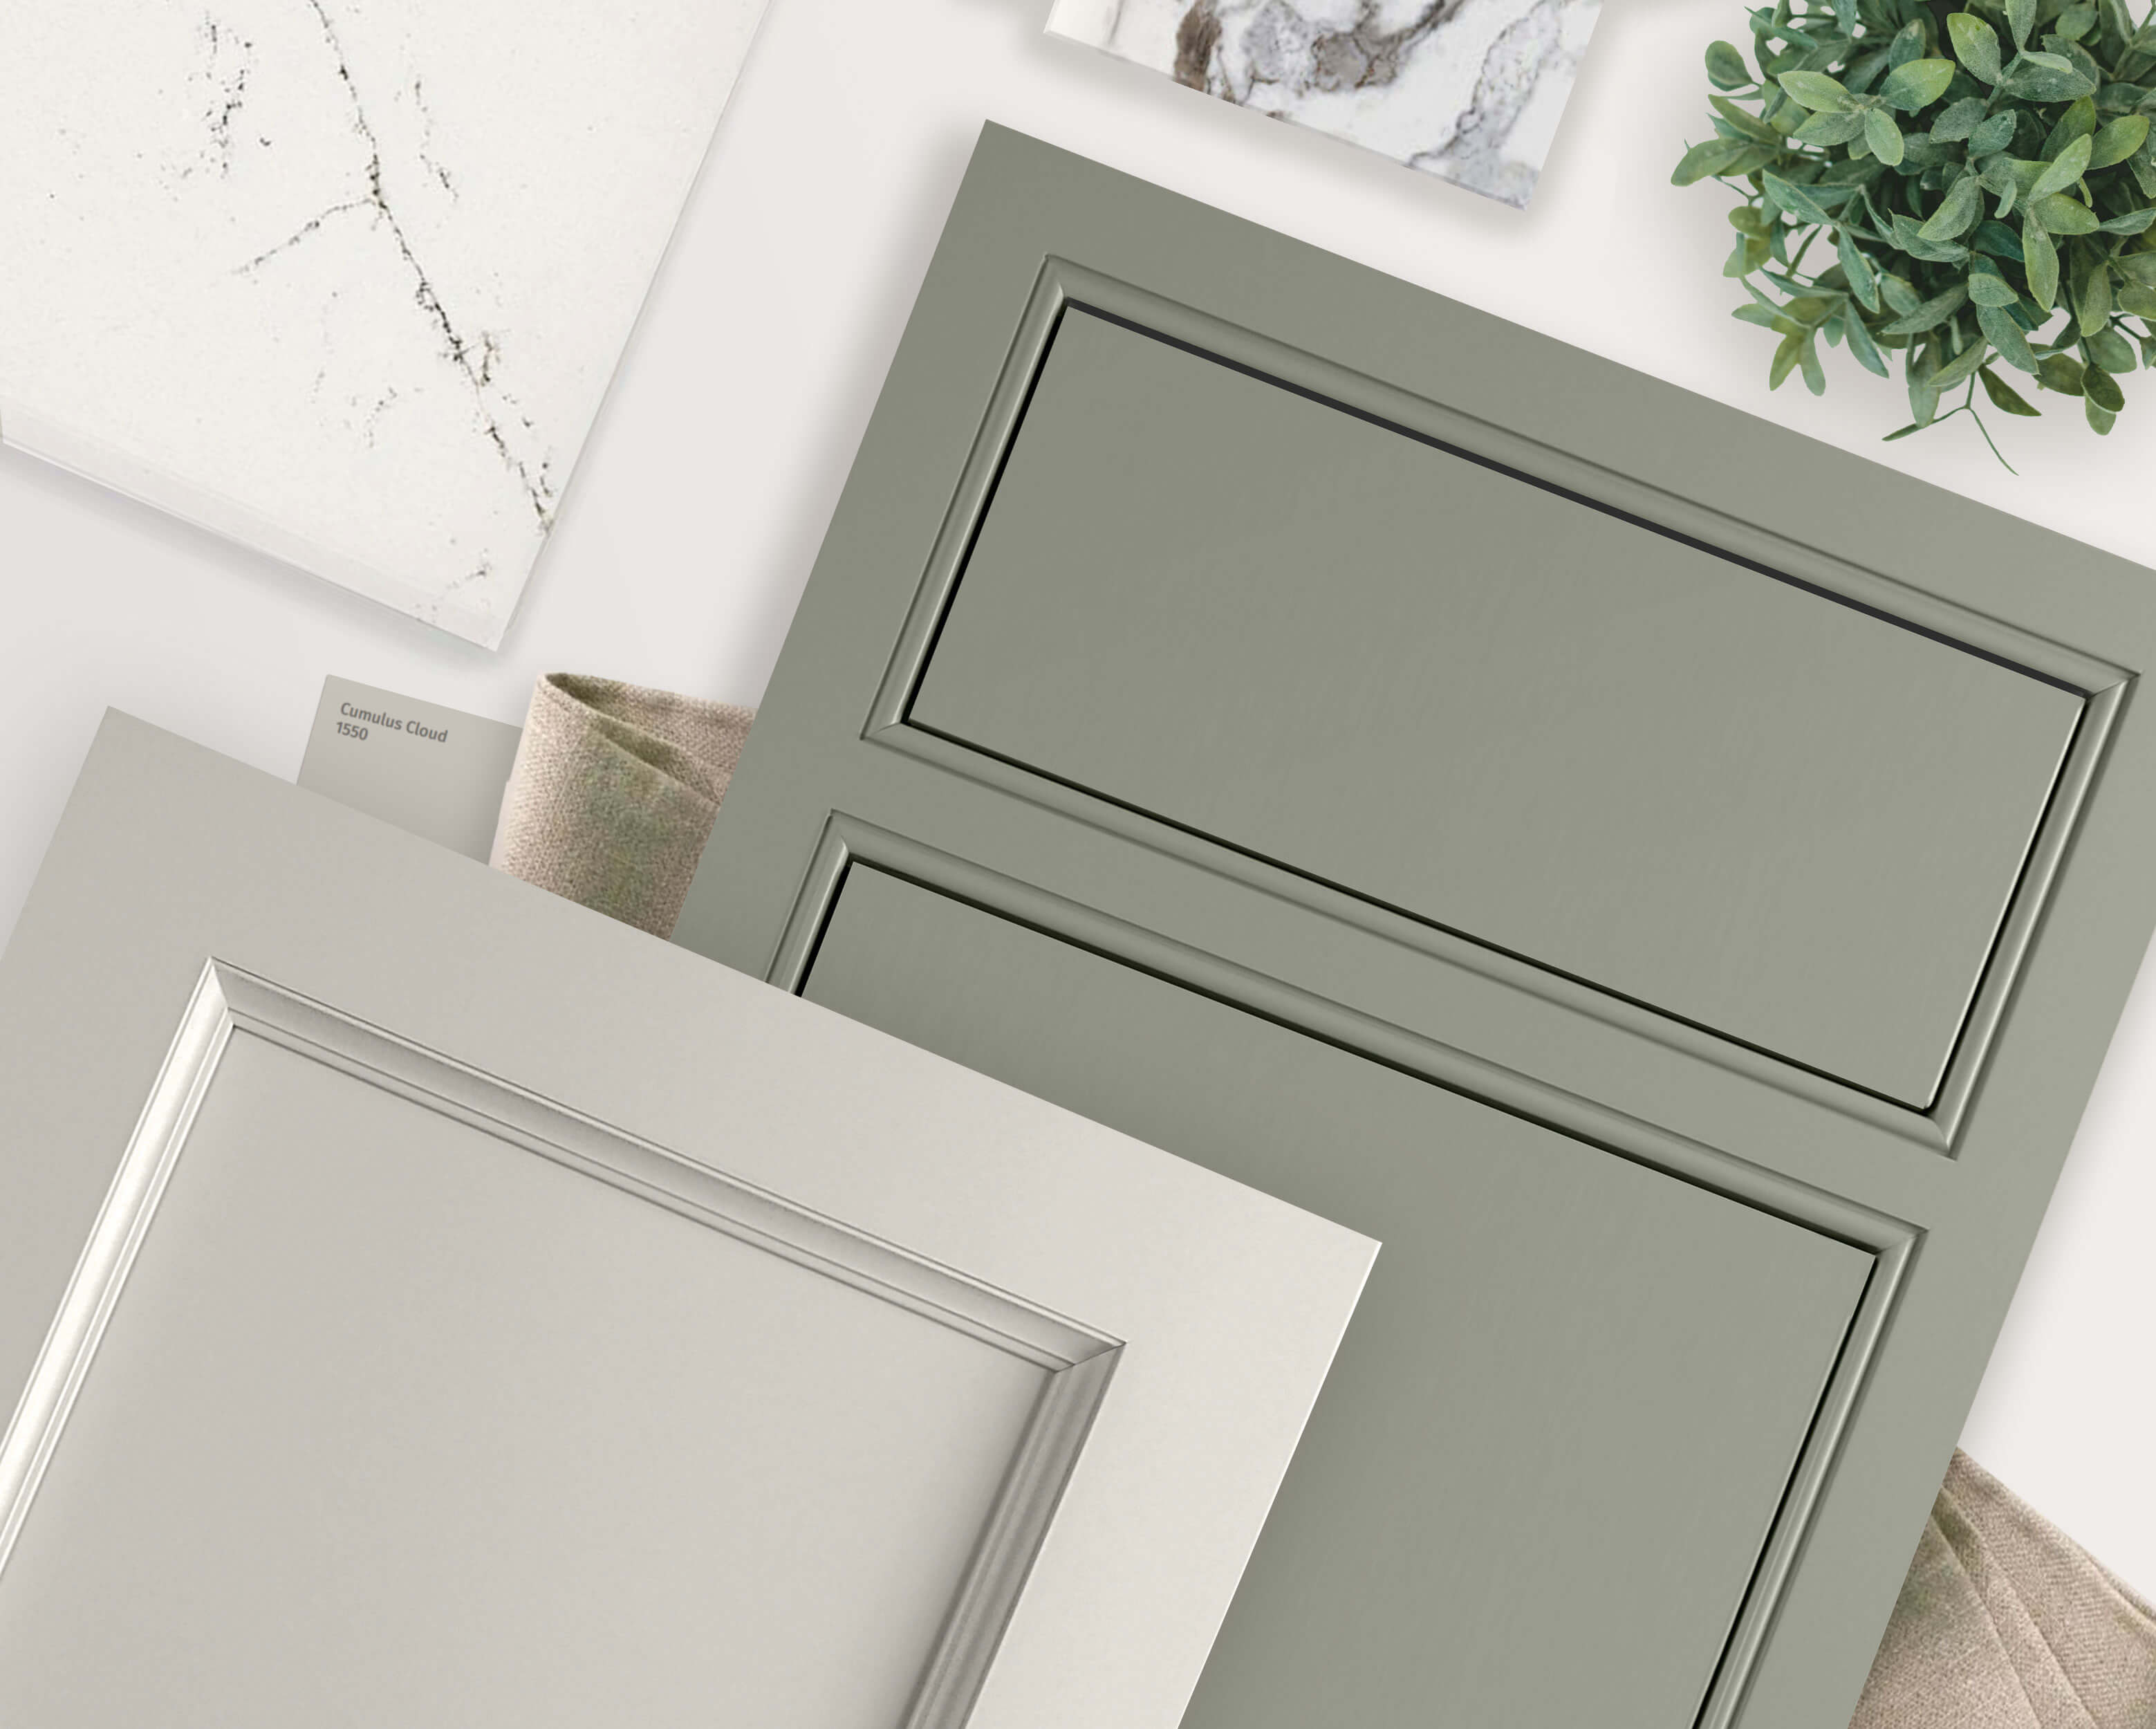 Two luxurious painted cabinet doors with contrasting painted colors of beige and sage green with a premium, high-tech painted finish.